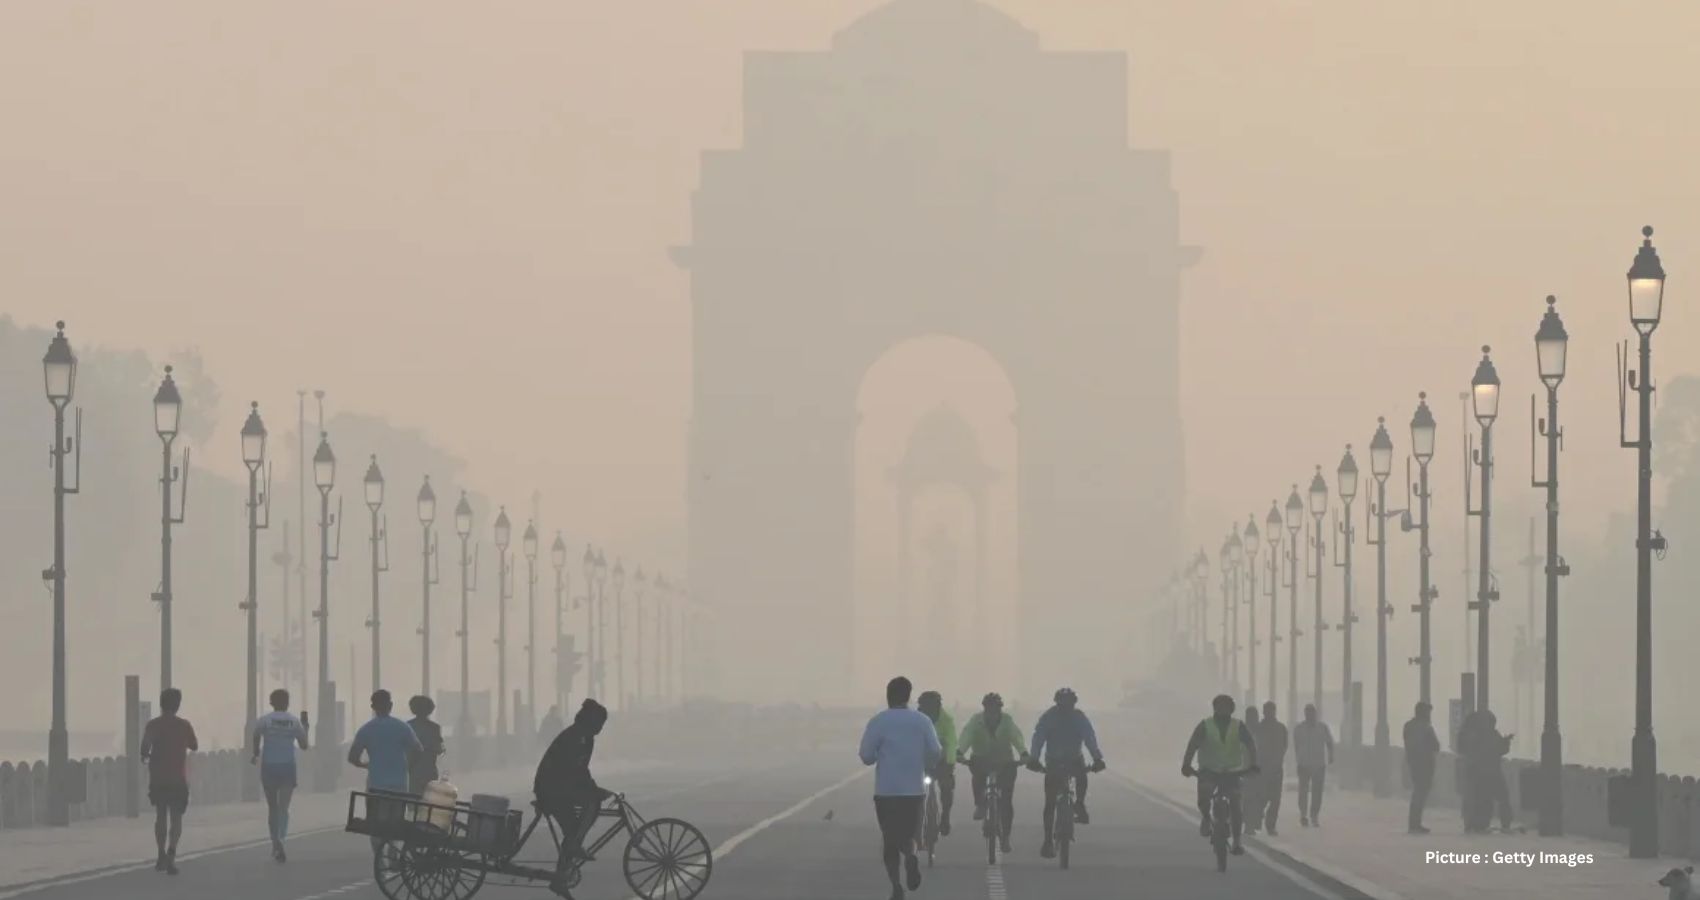 Report Reveals Alarming Air Pollution Crisis: Asia Bears Brunt, Urgent Action Needed Worldwide